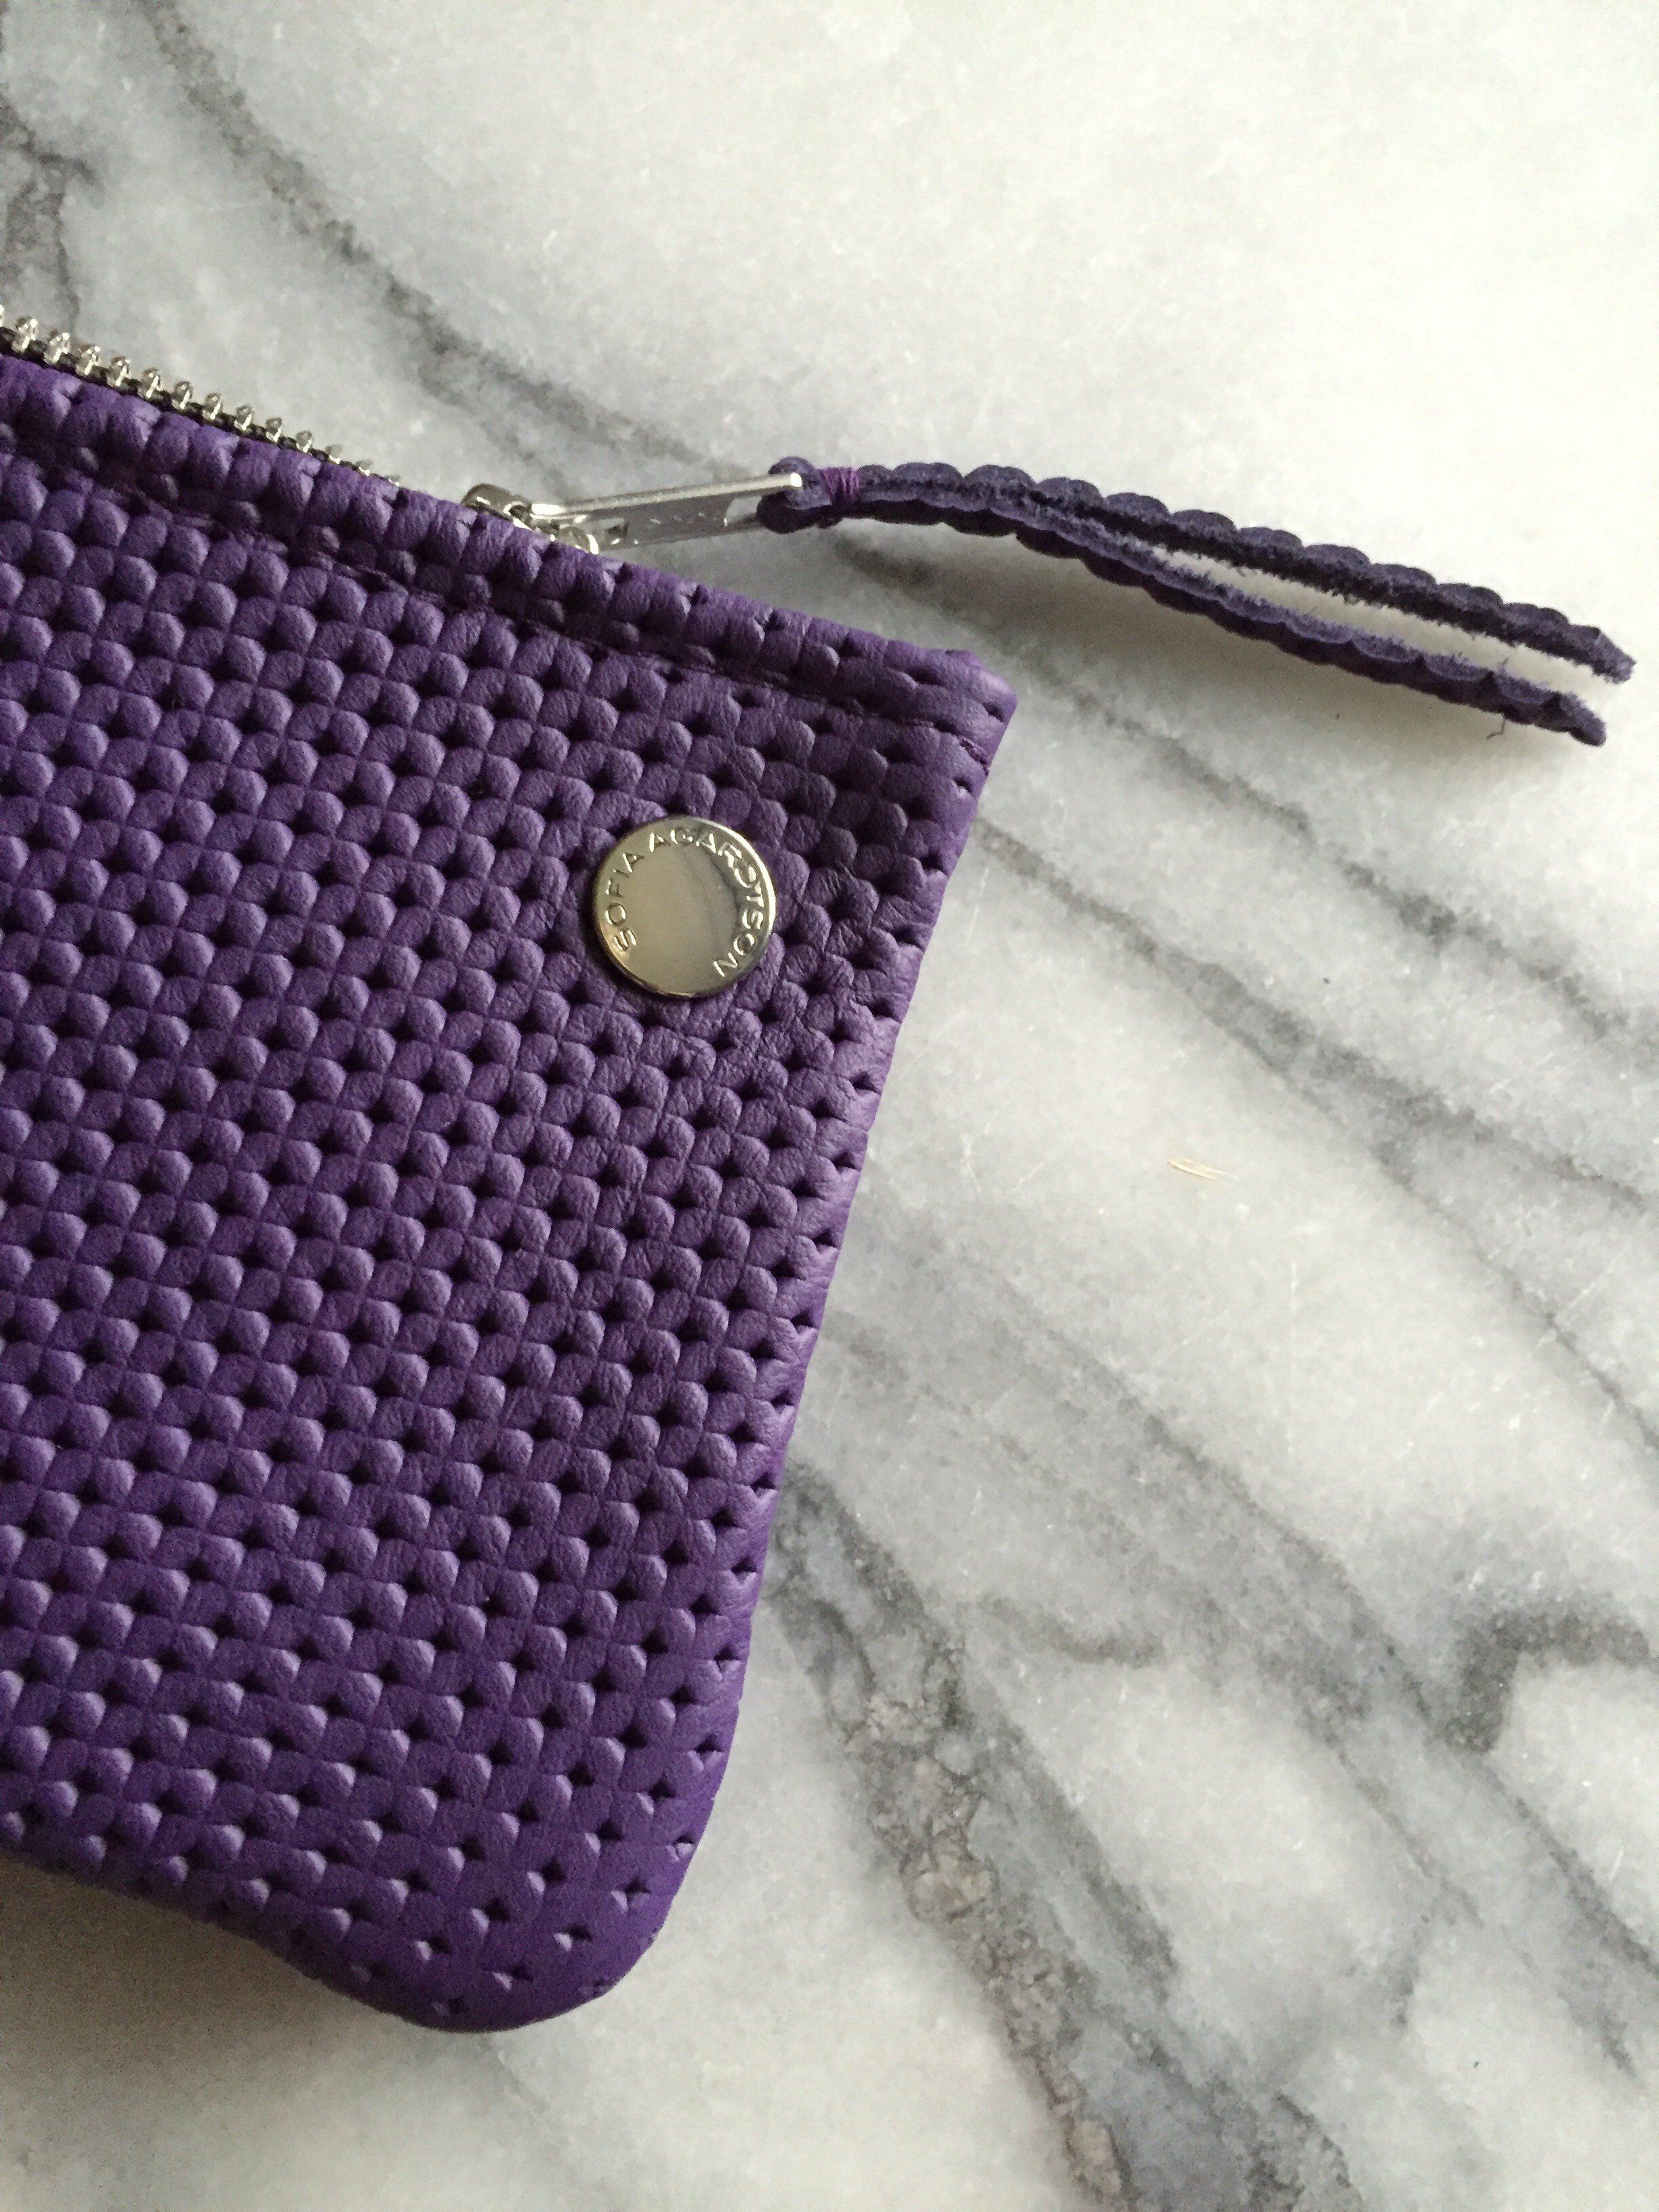 VIP iPhone Wallet - Purple Perforated Leather